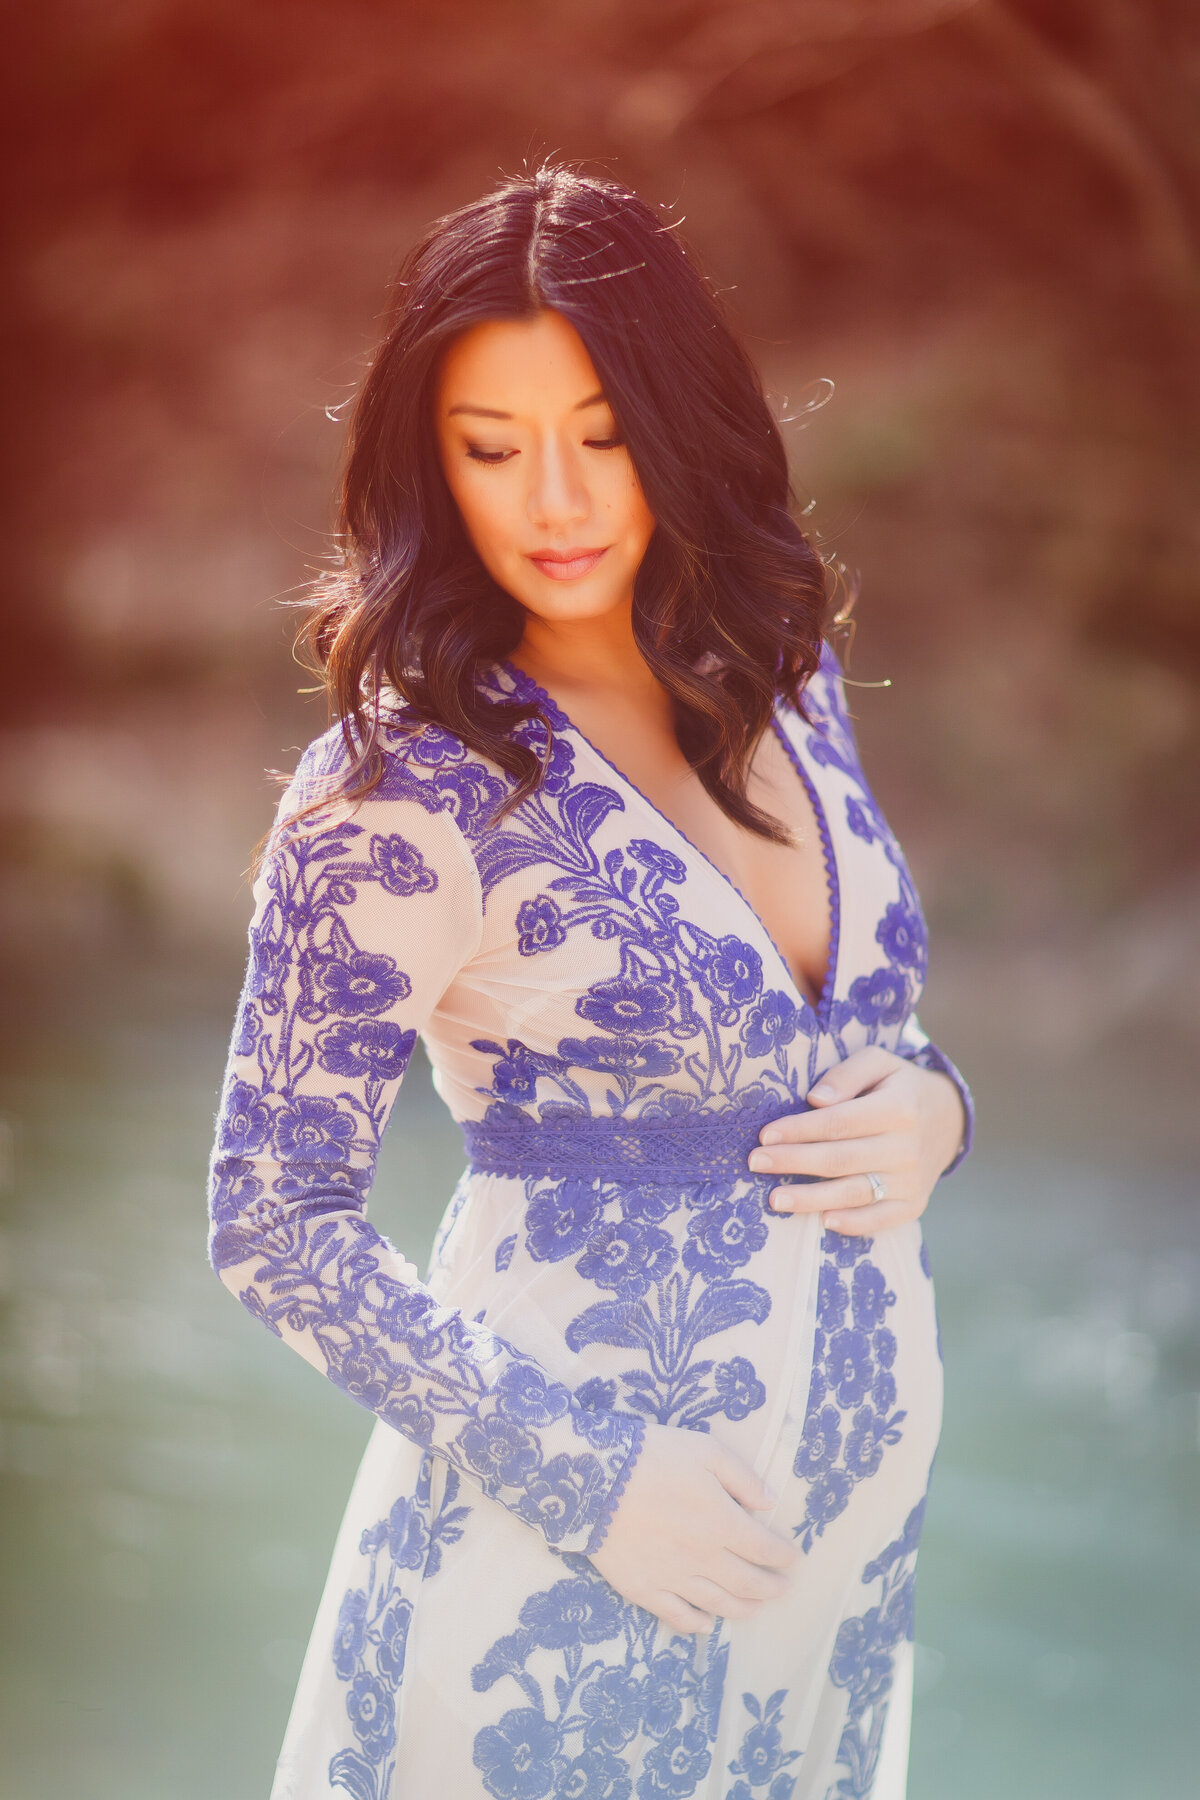 Celebrate the anticipation of your baby's arrival with our expert maternity photographer.